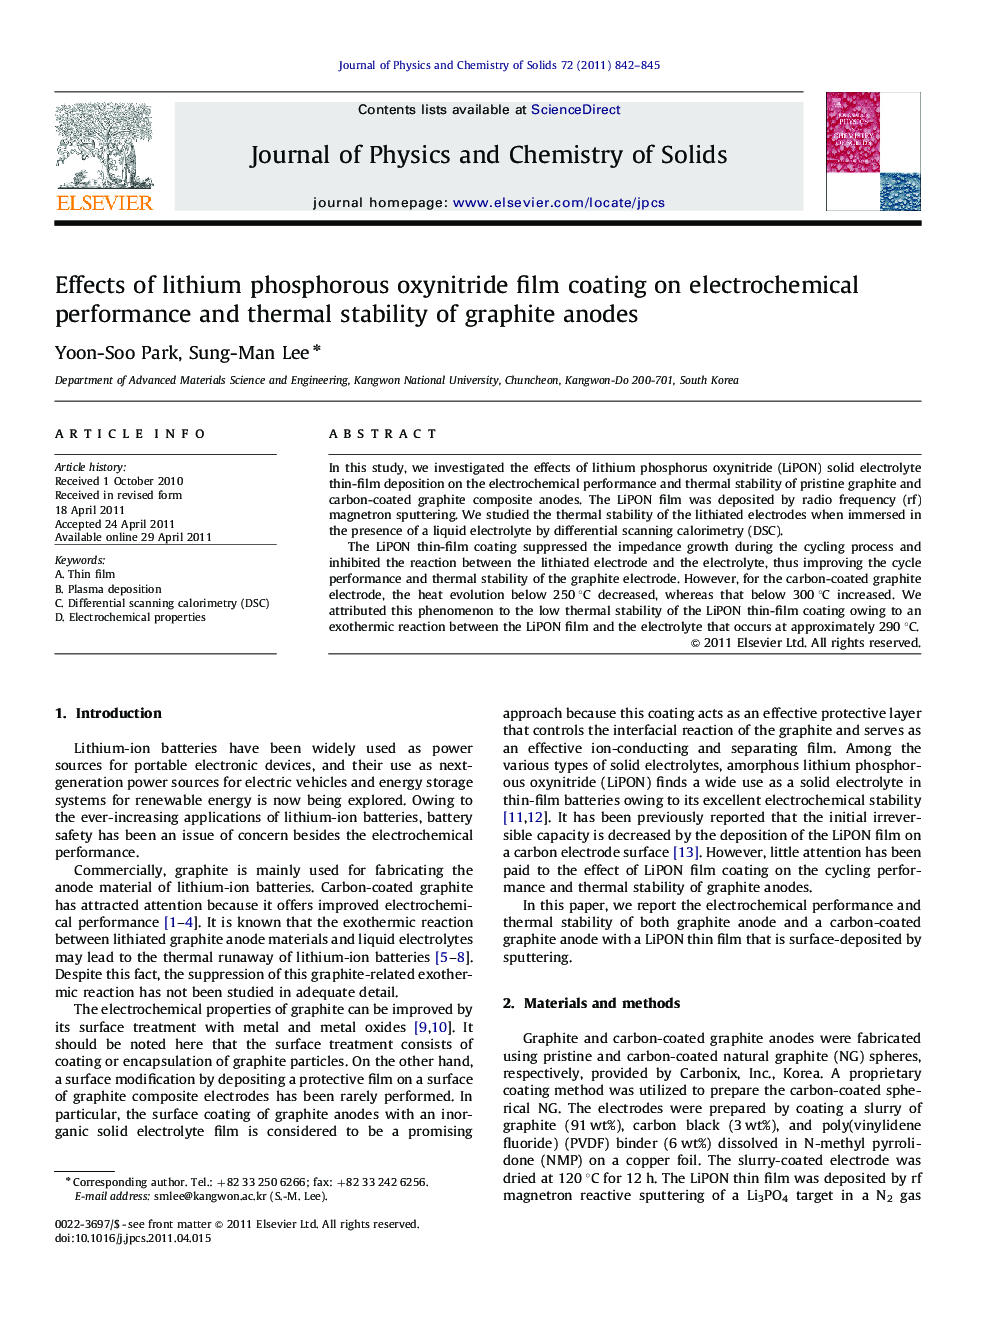 Effects of lithium phosphorous oxynitride film coating on electrochemical performance and thermal stability of graphite anodes